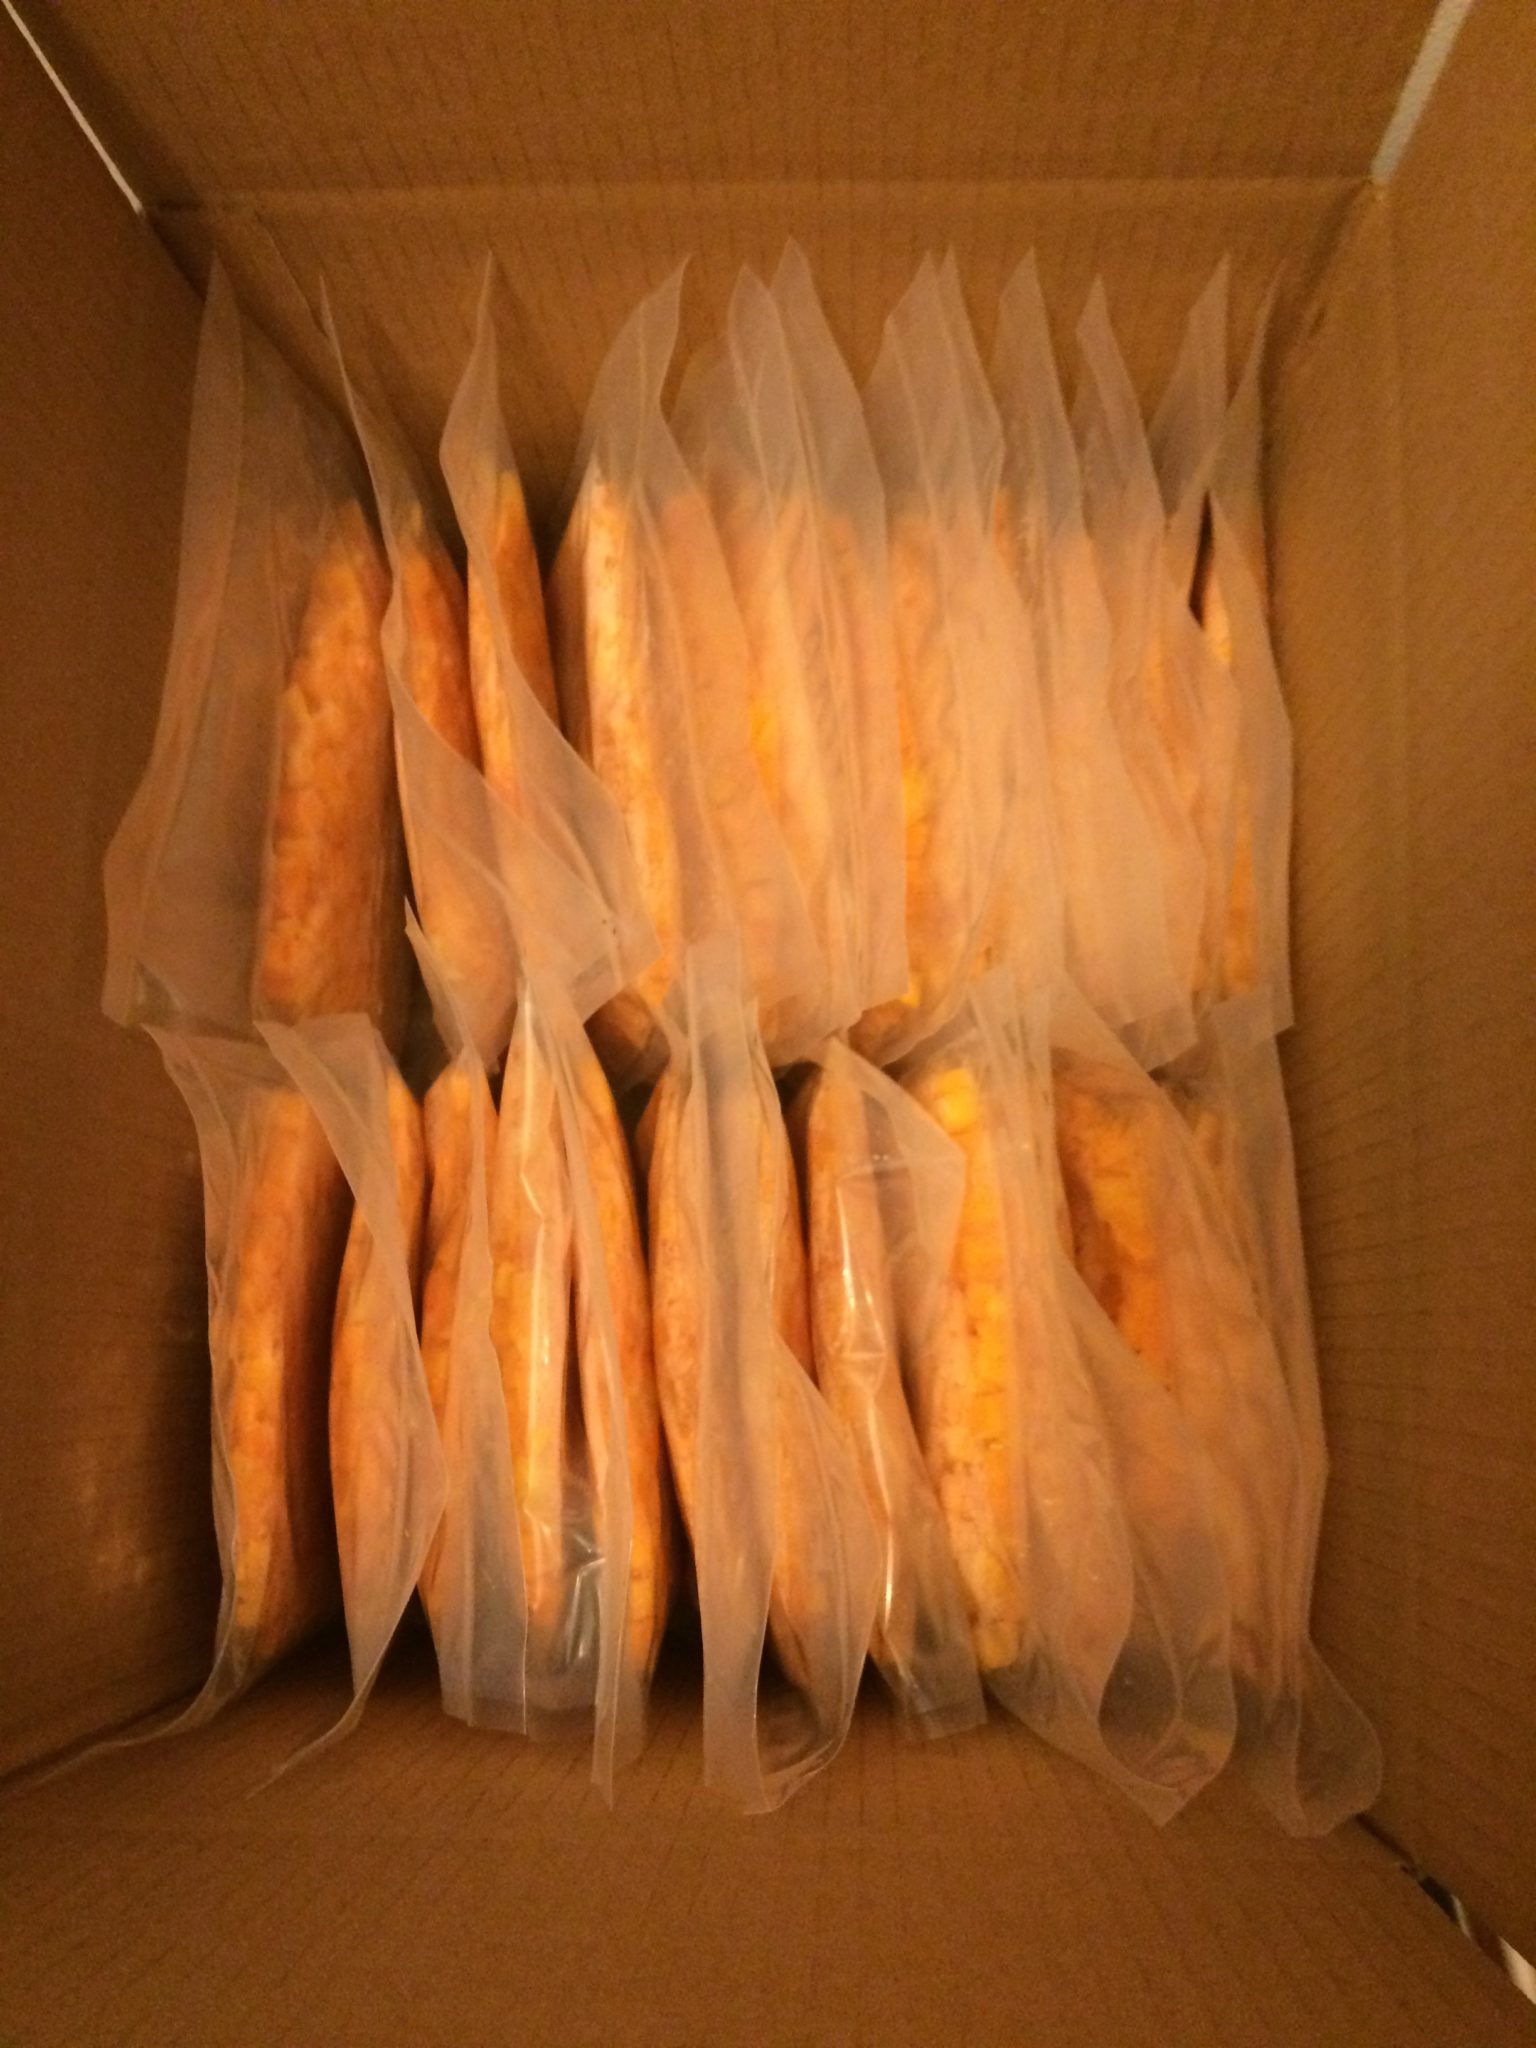 diced butternut squash bagged and boxed